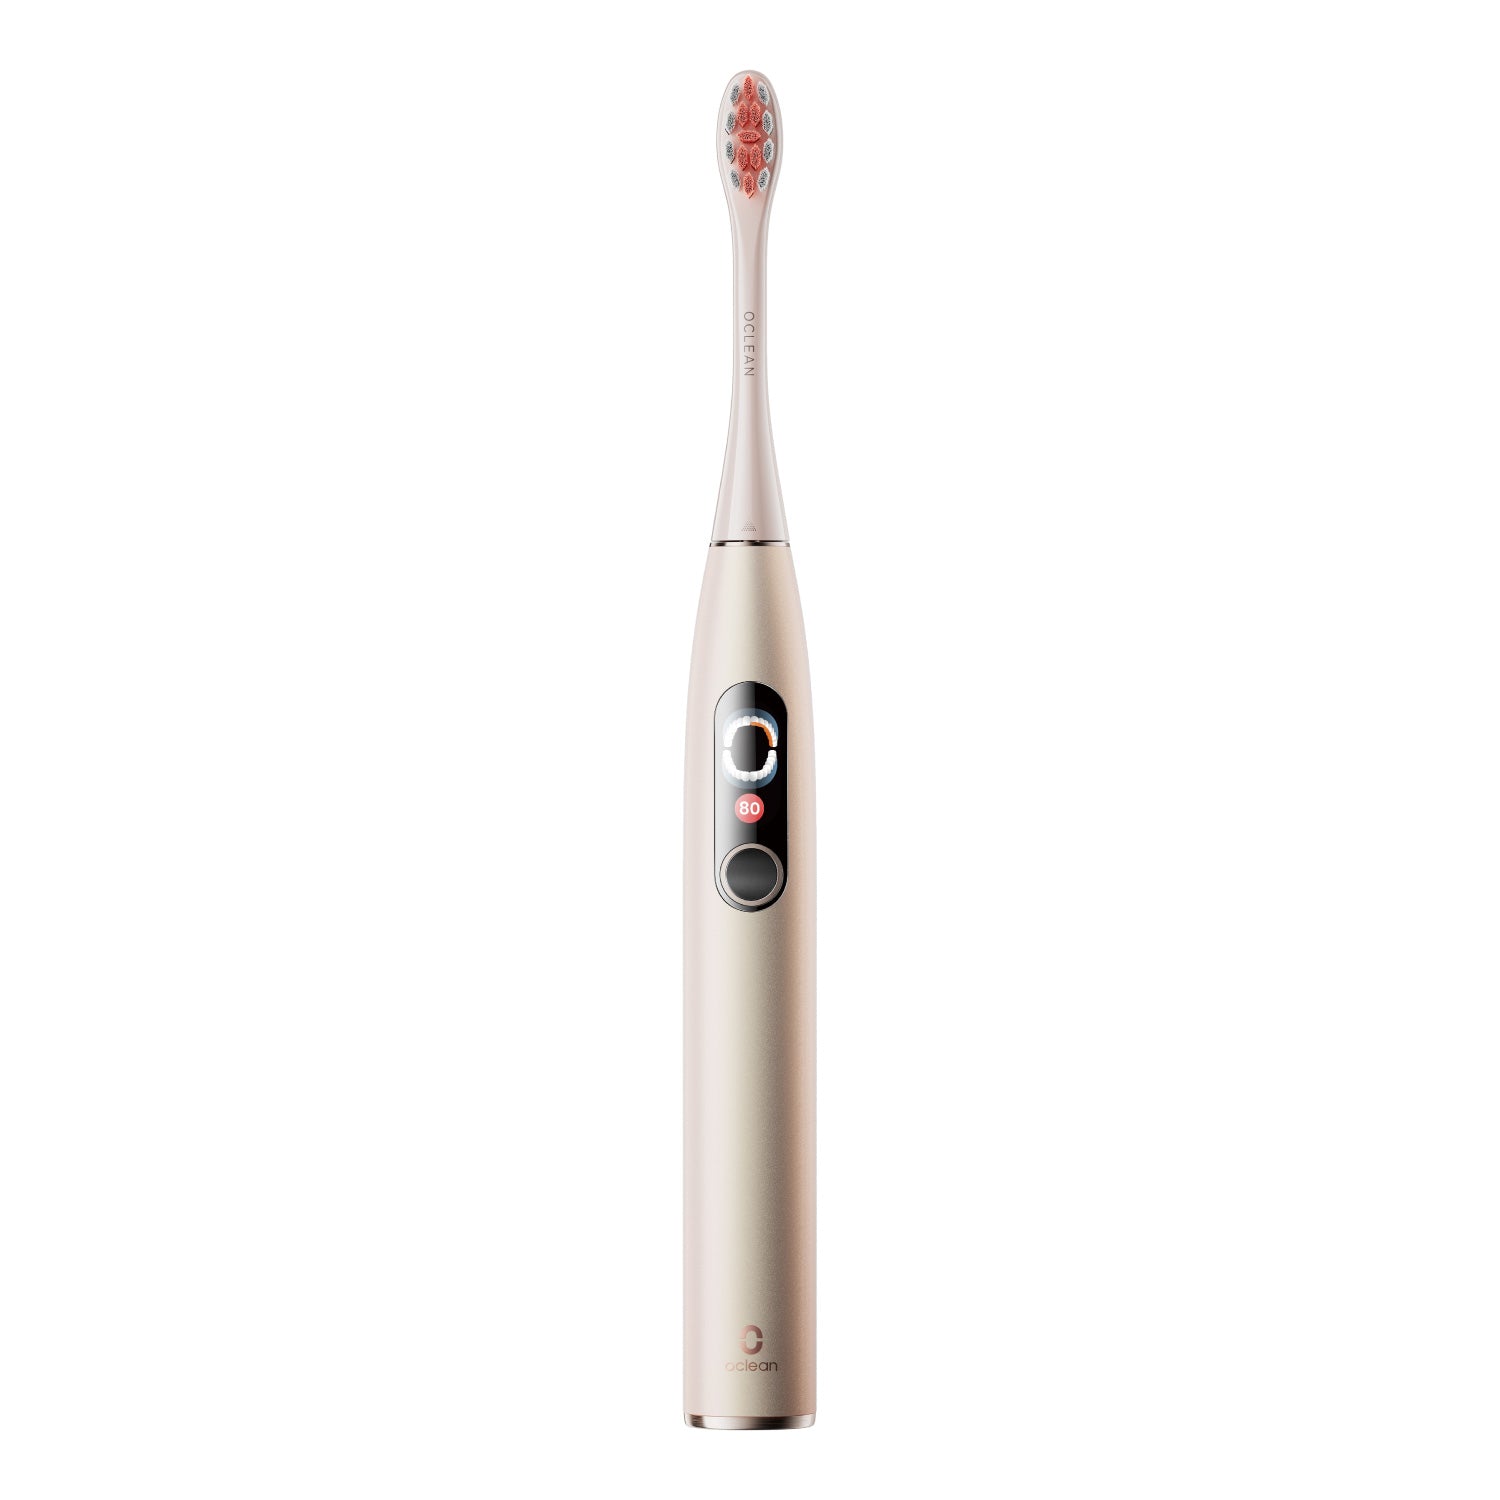 Oclean X Pro Digital Sonic Electric Toothbrush-Toothbrushes-Oclean US Store